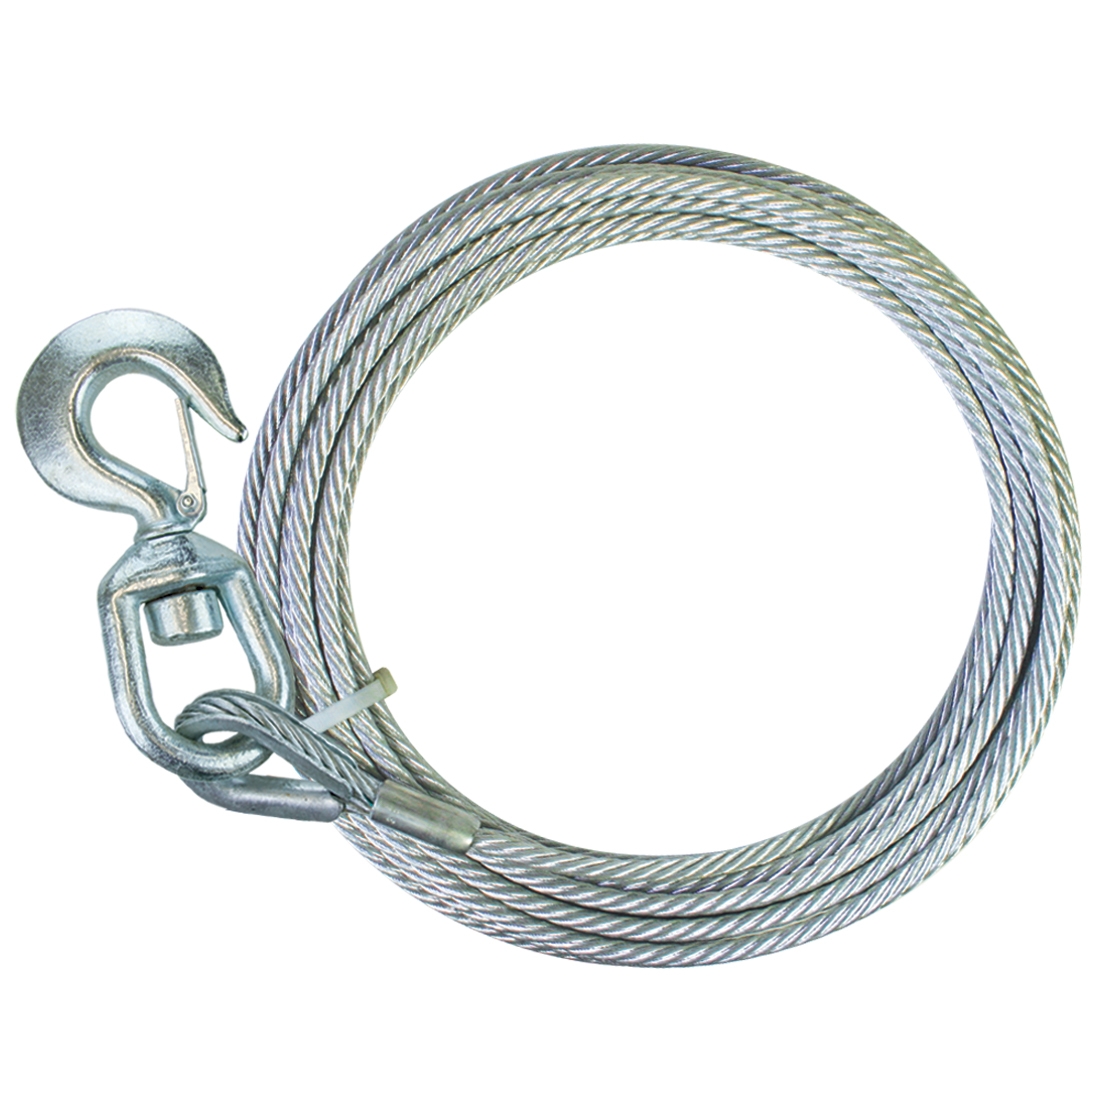 5/8 x 100 ft Wire Rope Winch Line Extension - 41200 lbs Breaking Strength